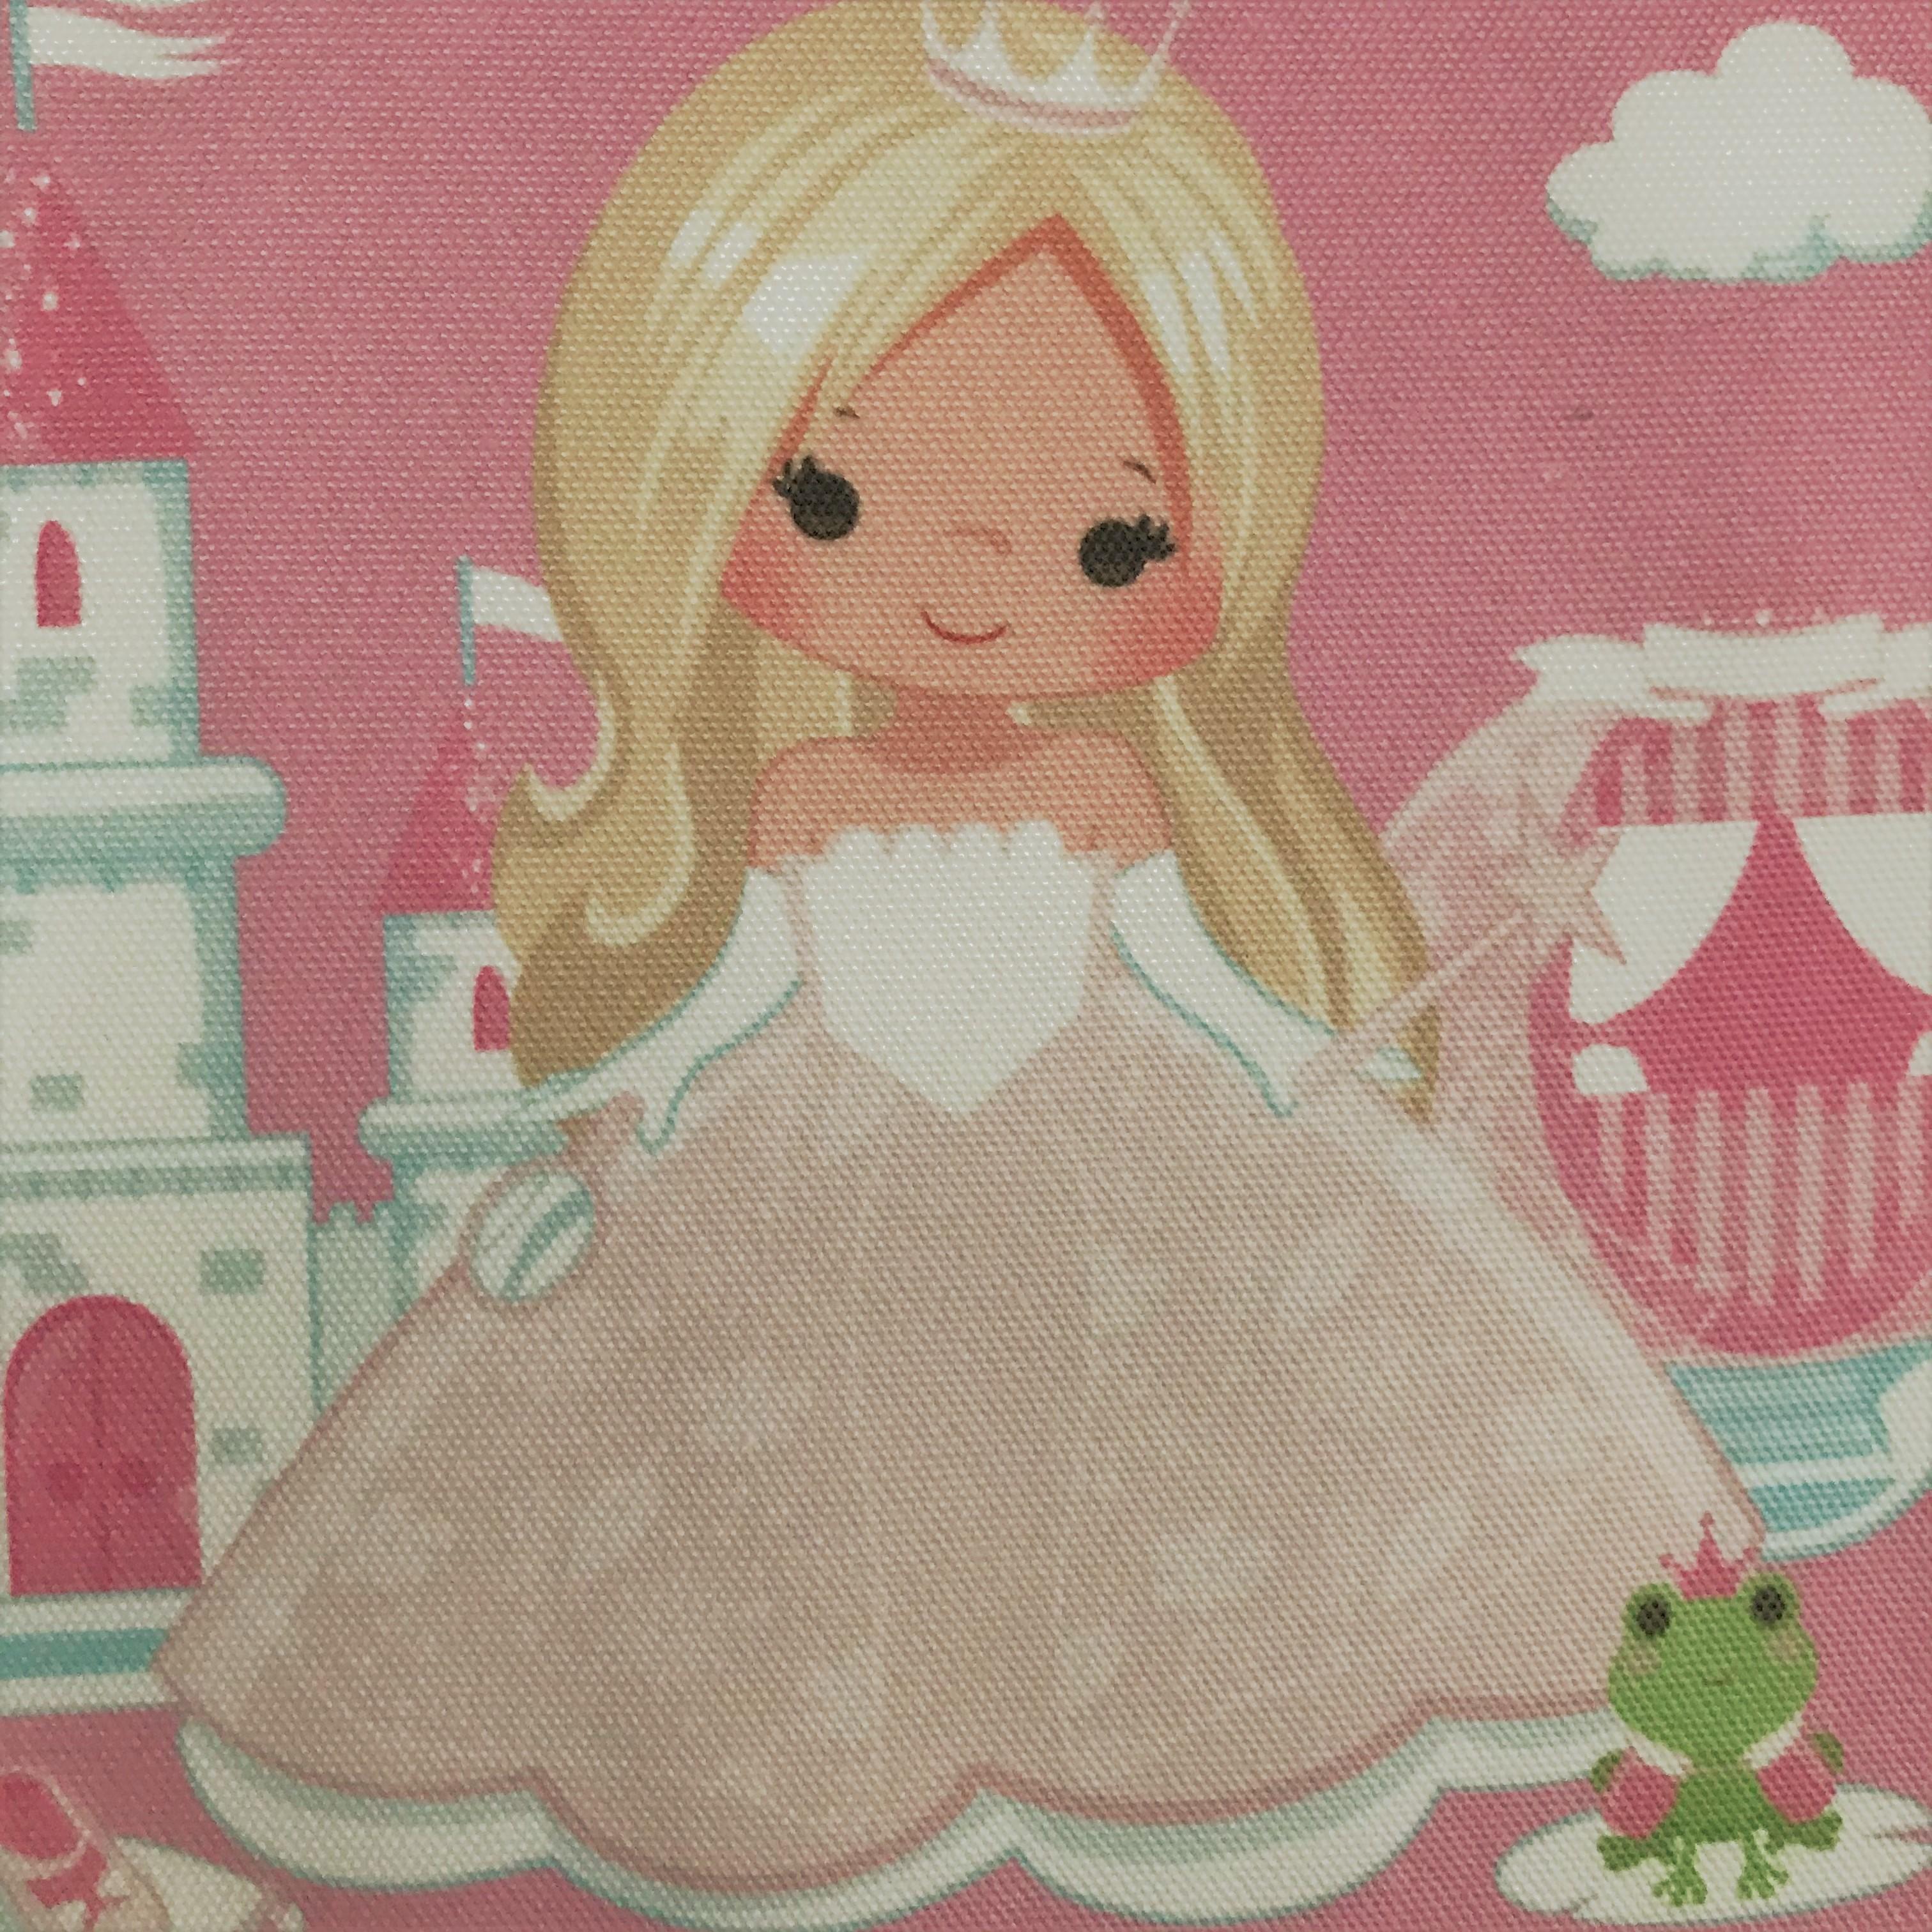 Princess Cushion Personalised Gift For Girl,Pink Bedroom,Girls Bedrrom Accessory.Blonde or Dark Hair